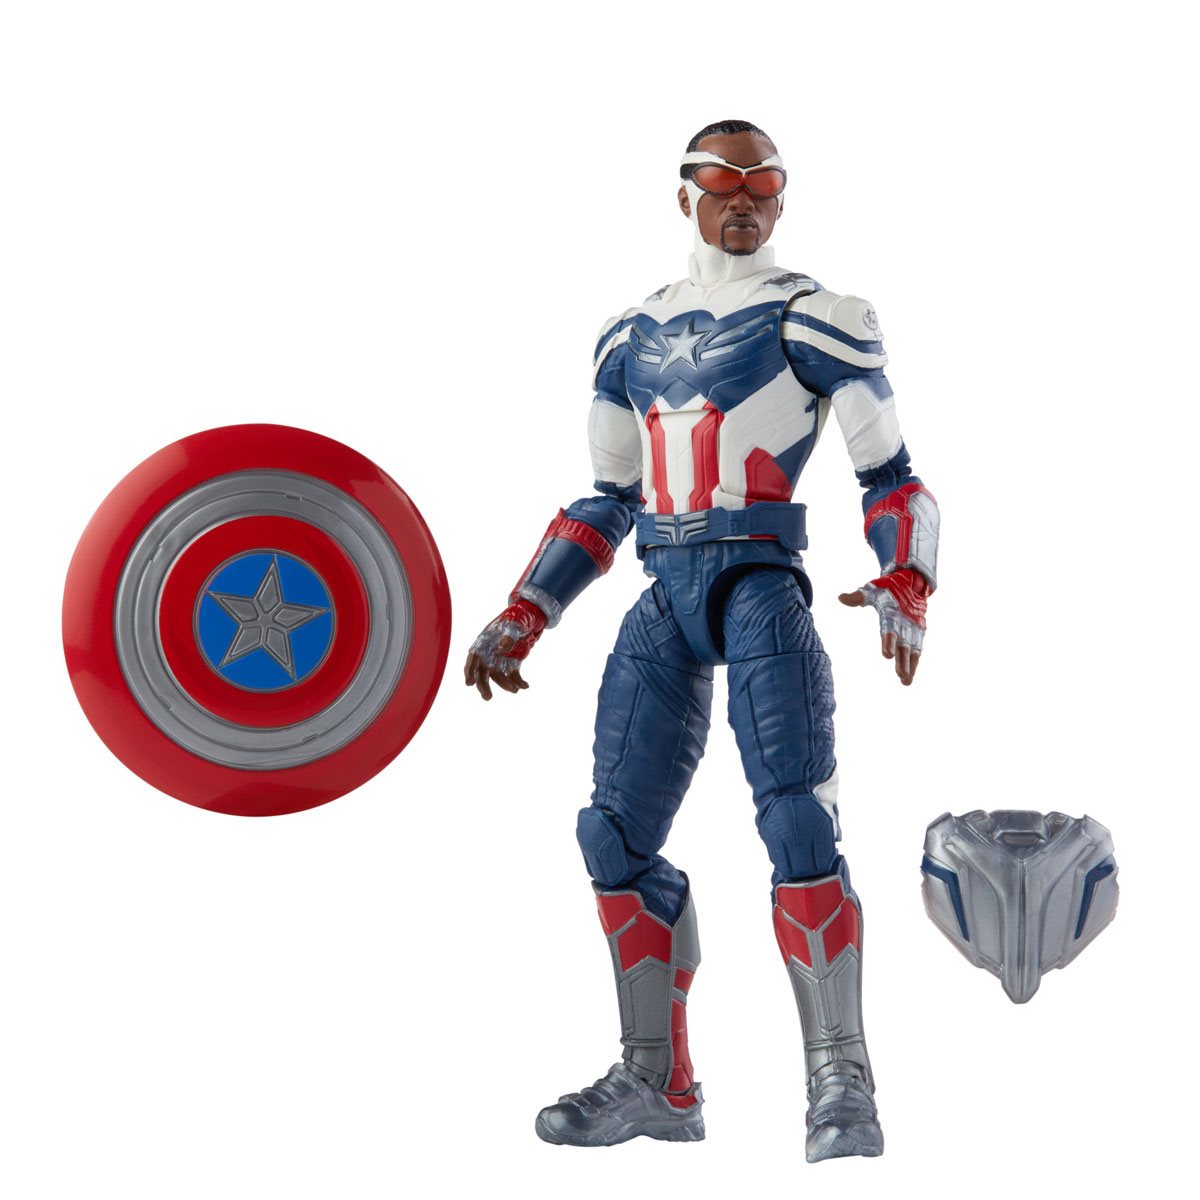 Avengers Marvel Captain America 6-Inch-Scale Action Figure 